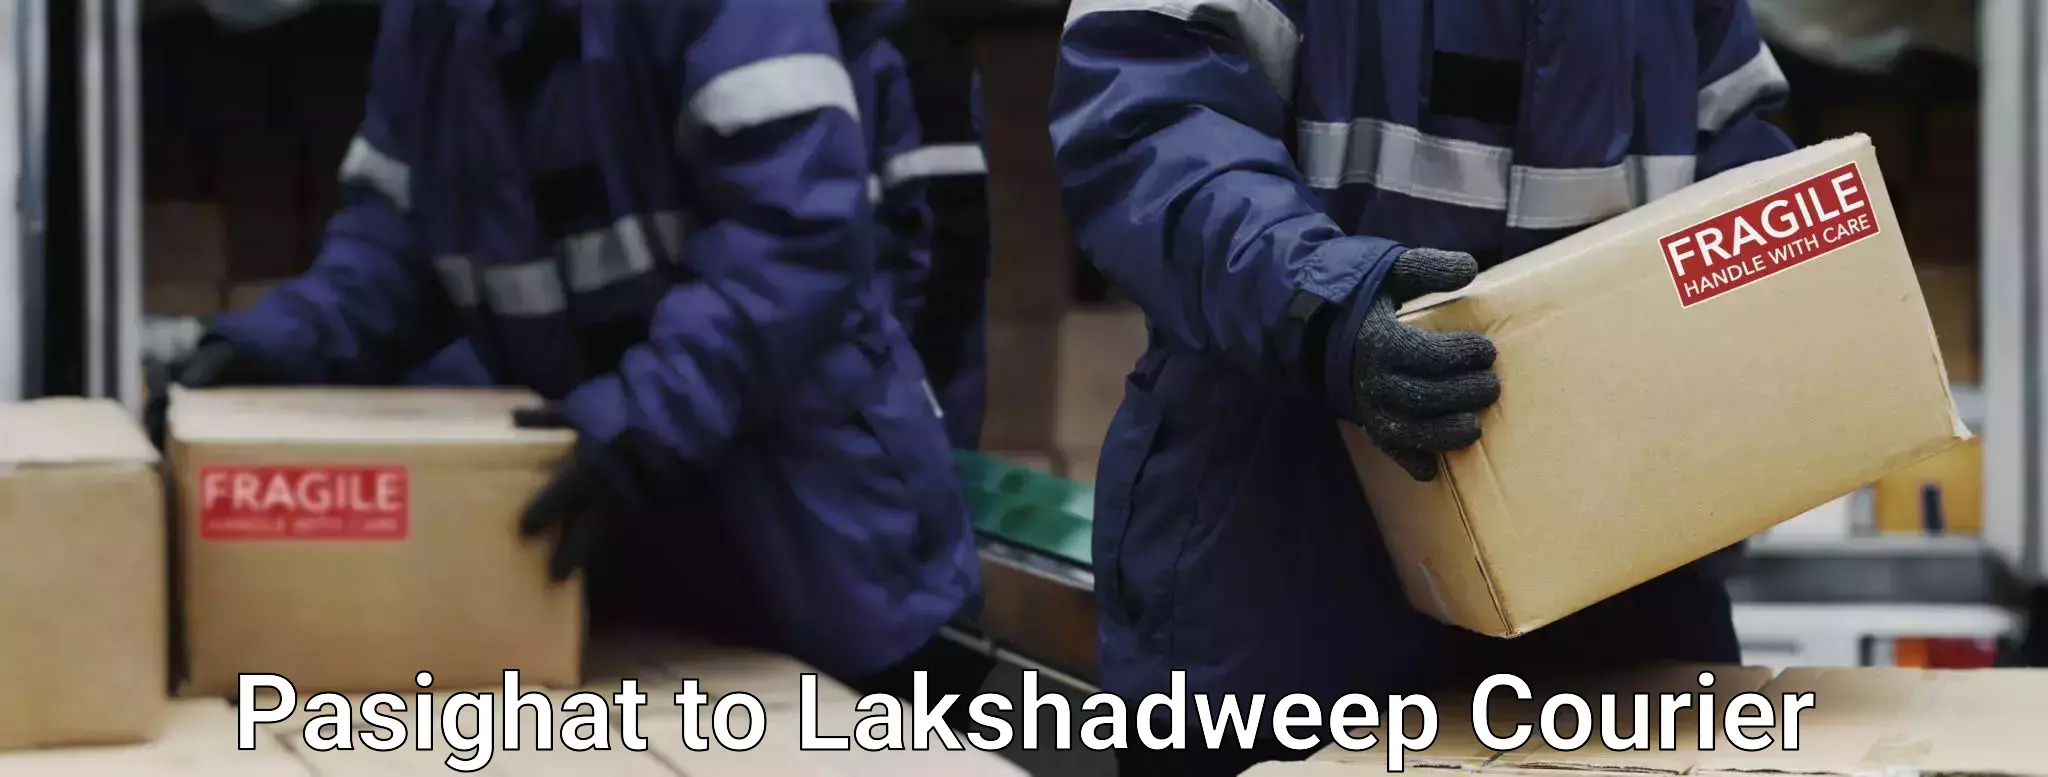 Trackable baggage shipping Pasighat to Lakshadweep